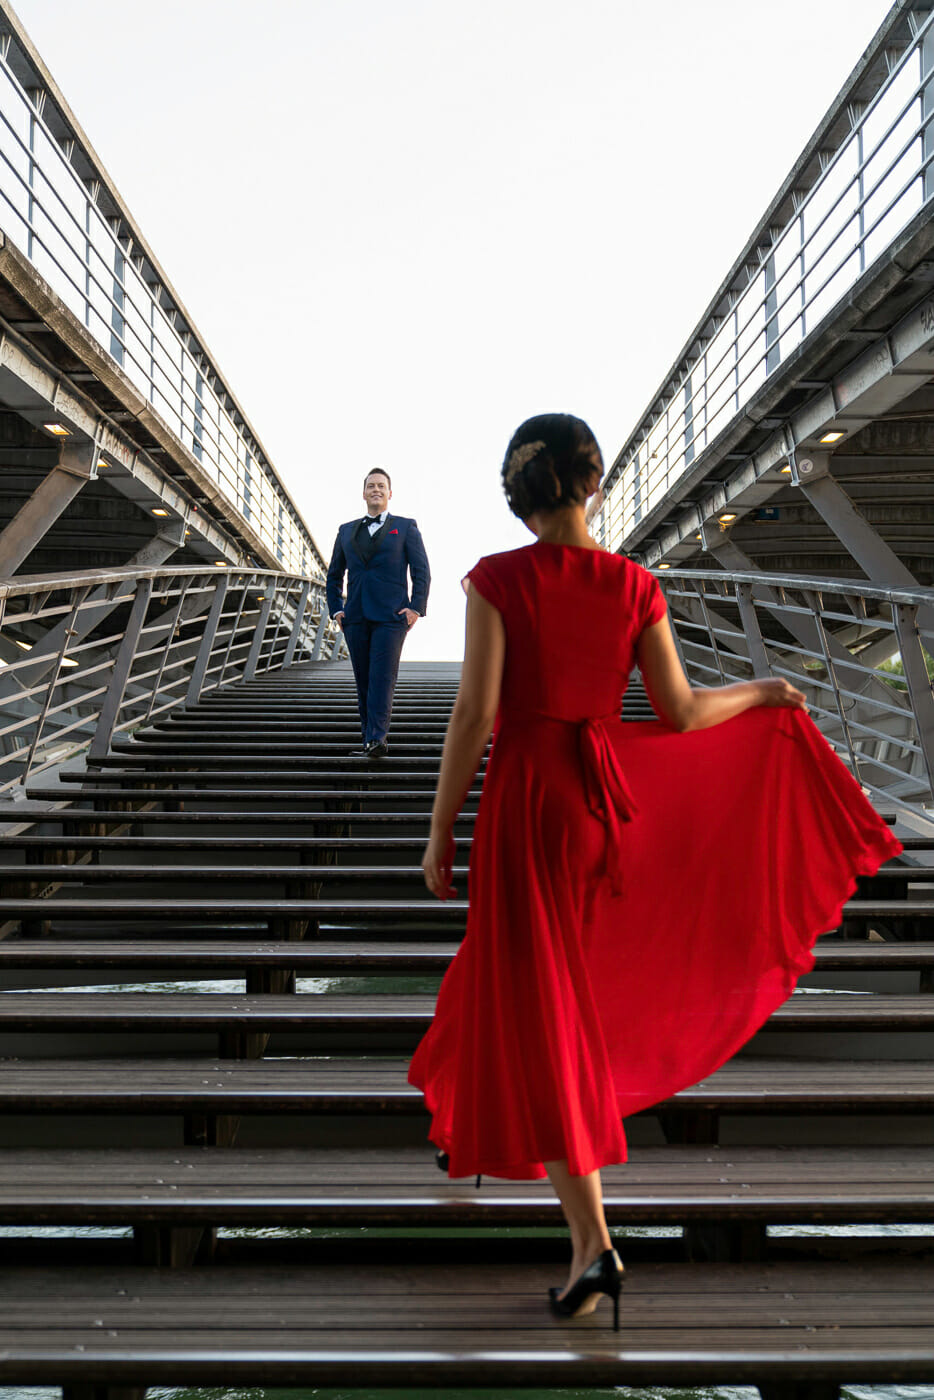 Couple photoshoot outfits red dress Tuileries Gardens Paris